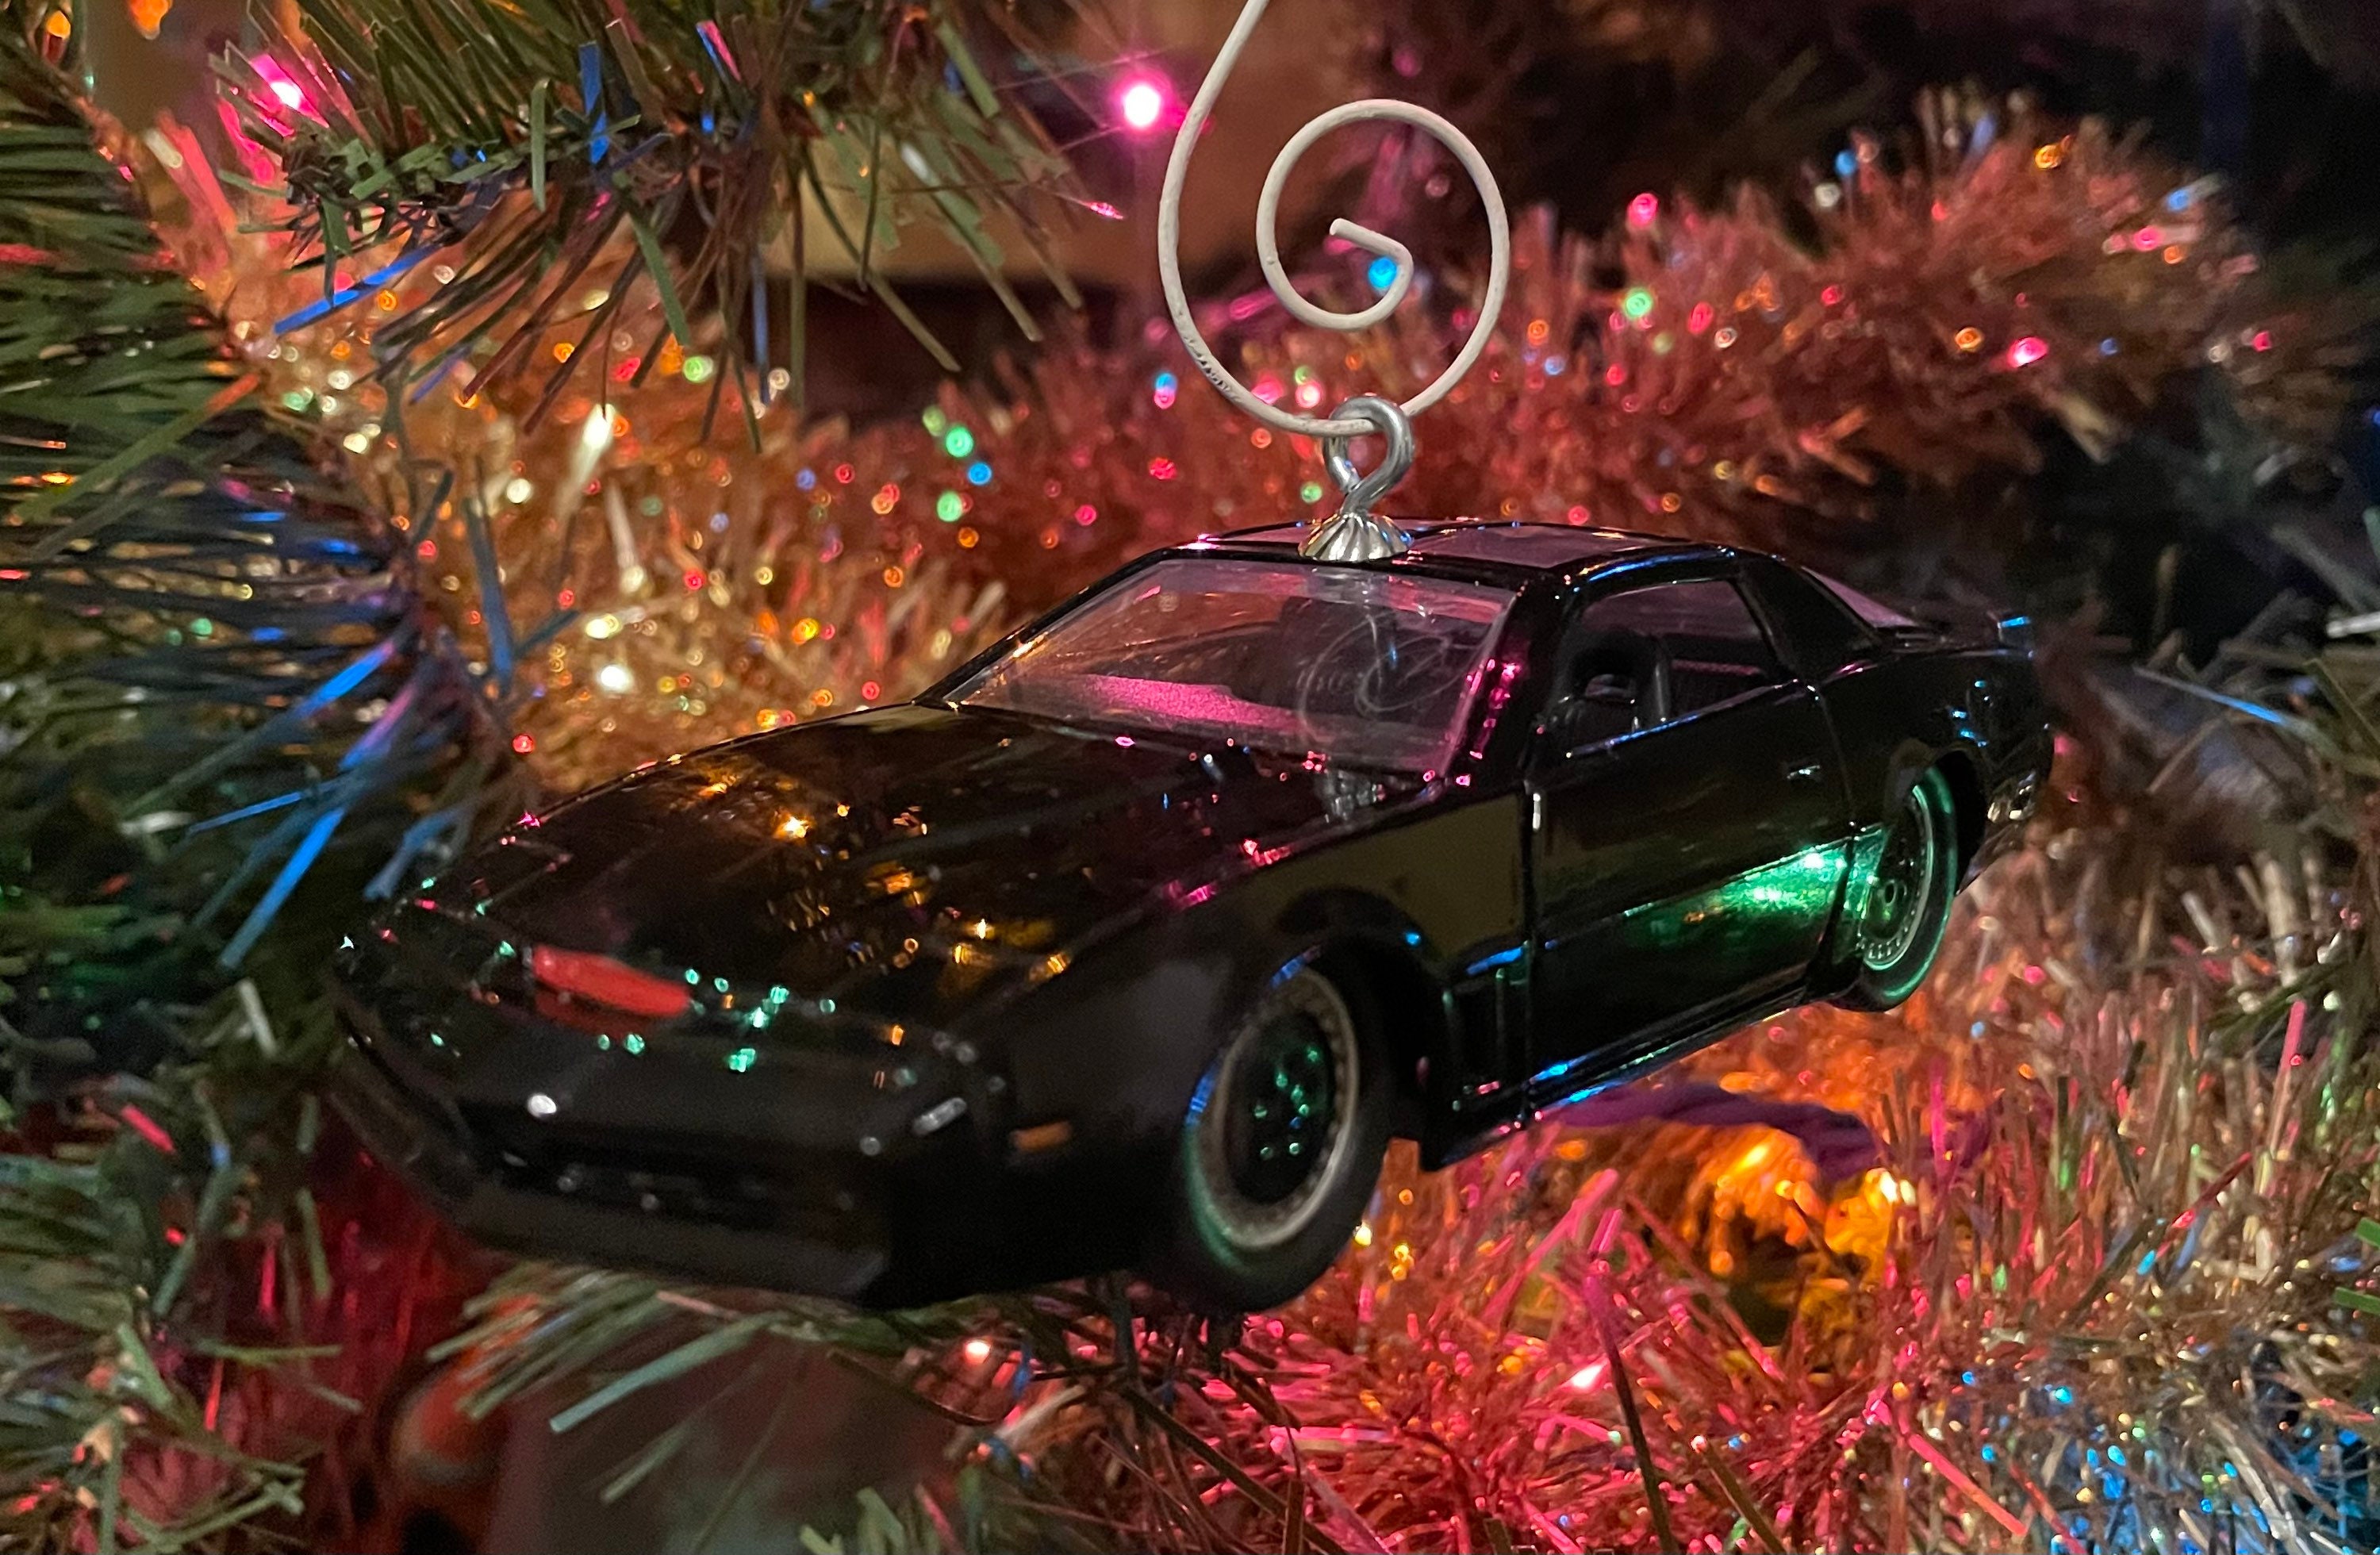 Knight Rider K.I.T.T Christmas Ornament 5 Inches in Length - Etsy